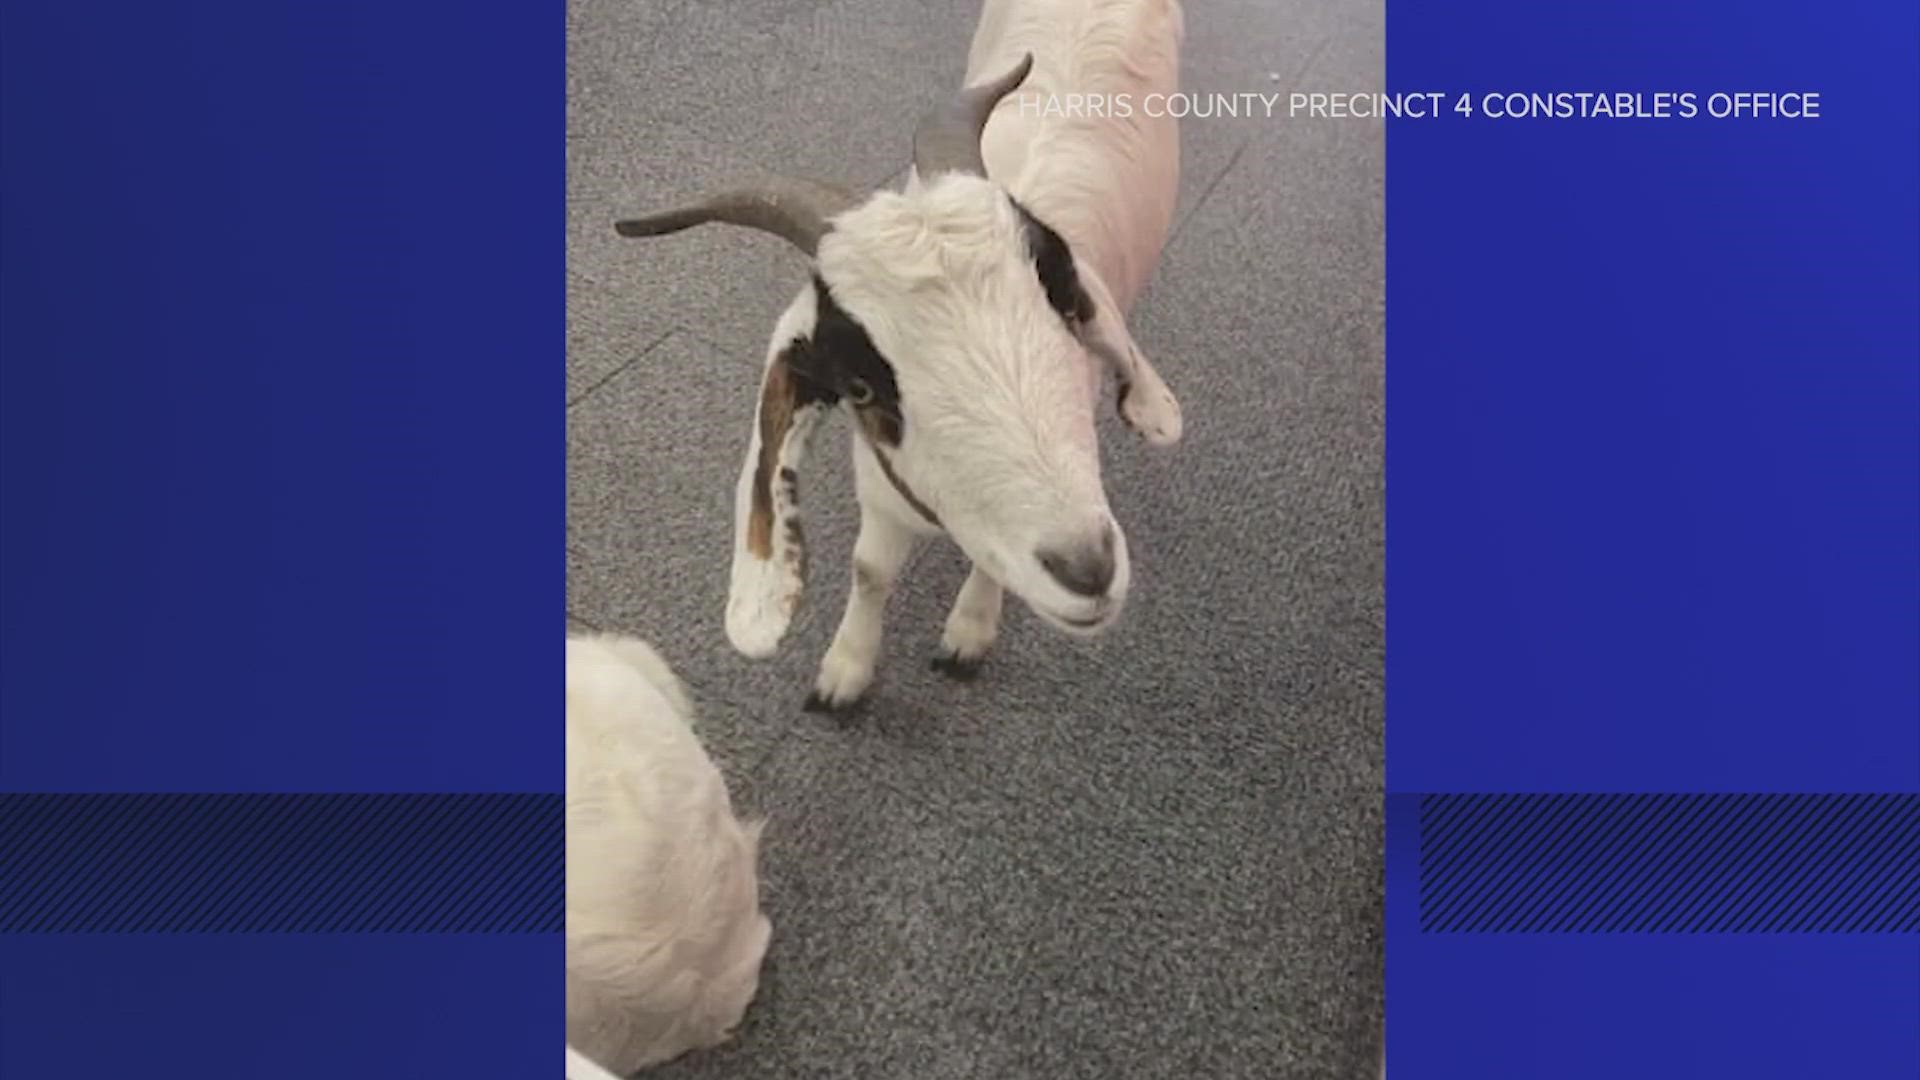 Deputies with the Harris County Precinct 4 Constable's Office were able to contain the goats and turn them over to trained professionals.